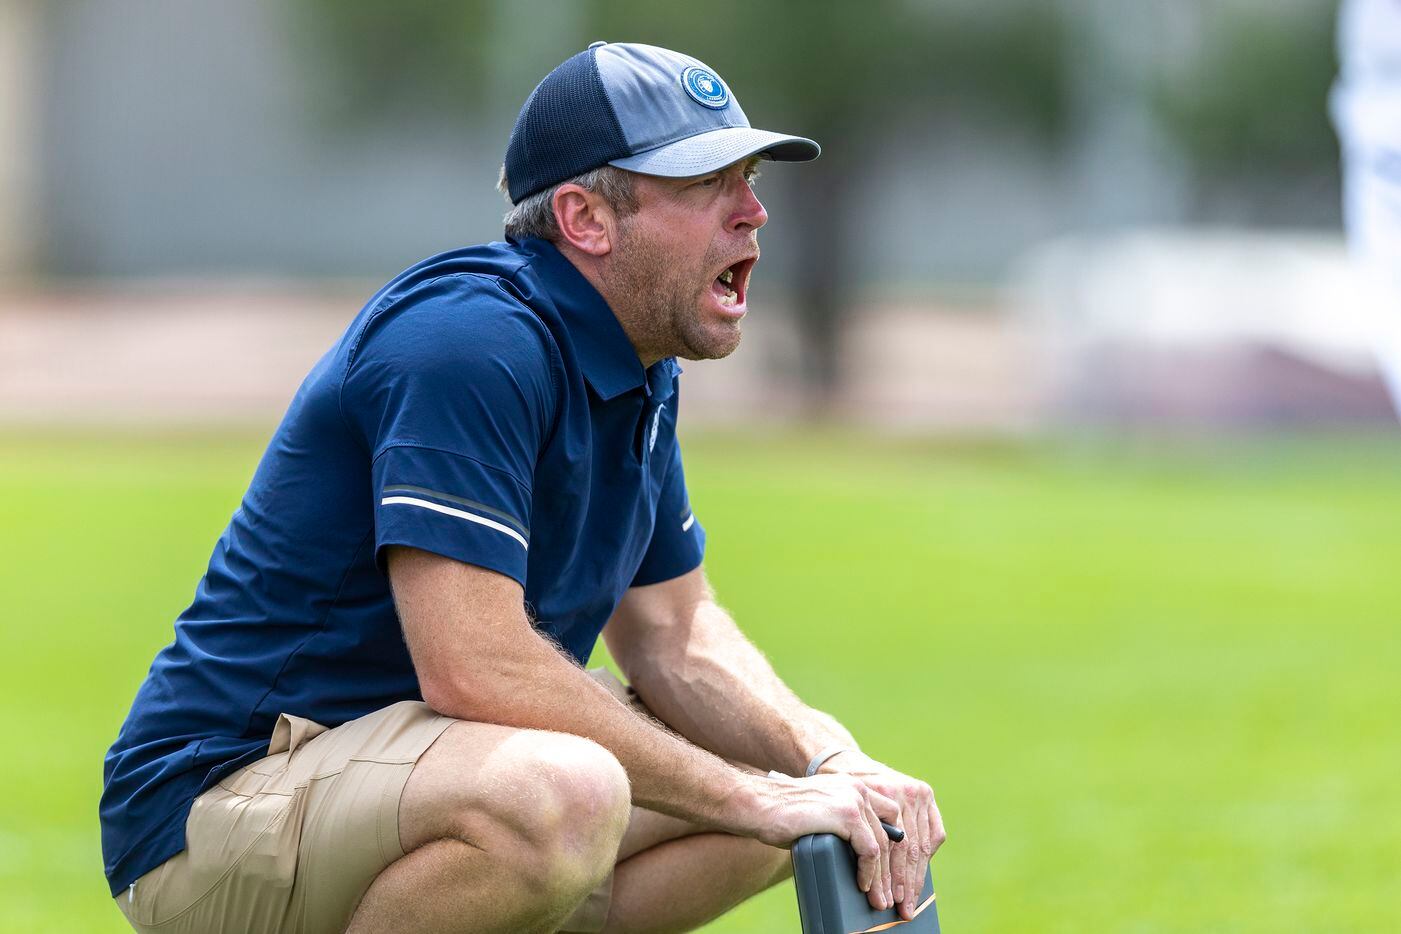 Episcopal School of Dallas head coach Jay Sothoron calls out to his players as they compete...